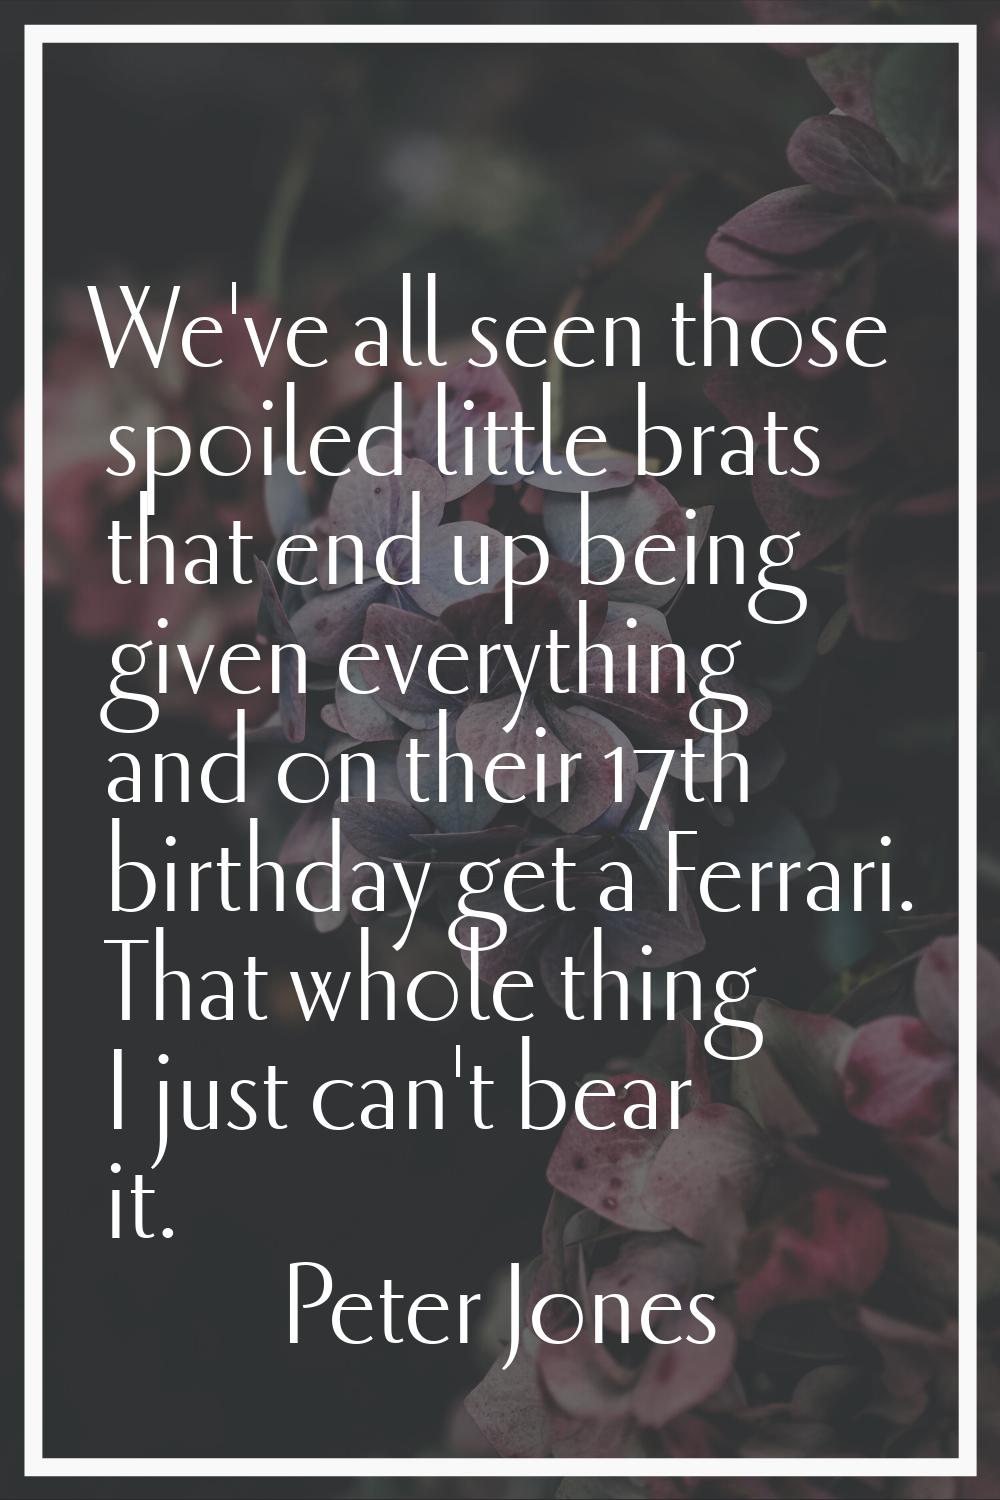 We've all seen those spoiled little brats that end up being given everything and on their 17th birt